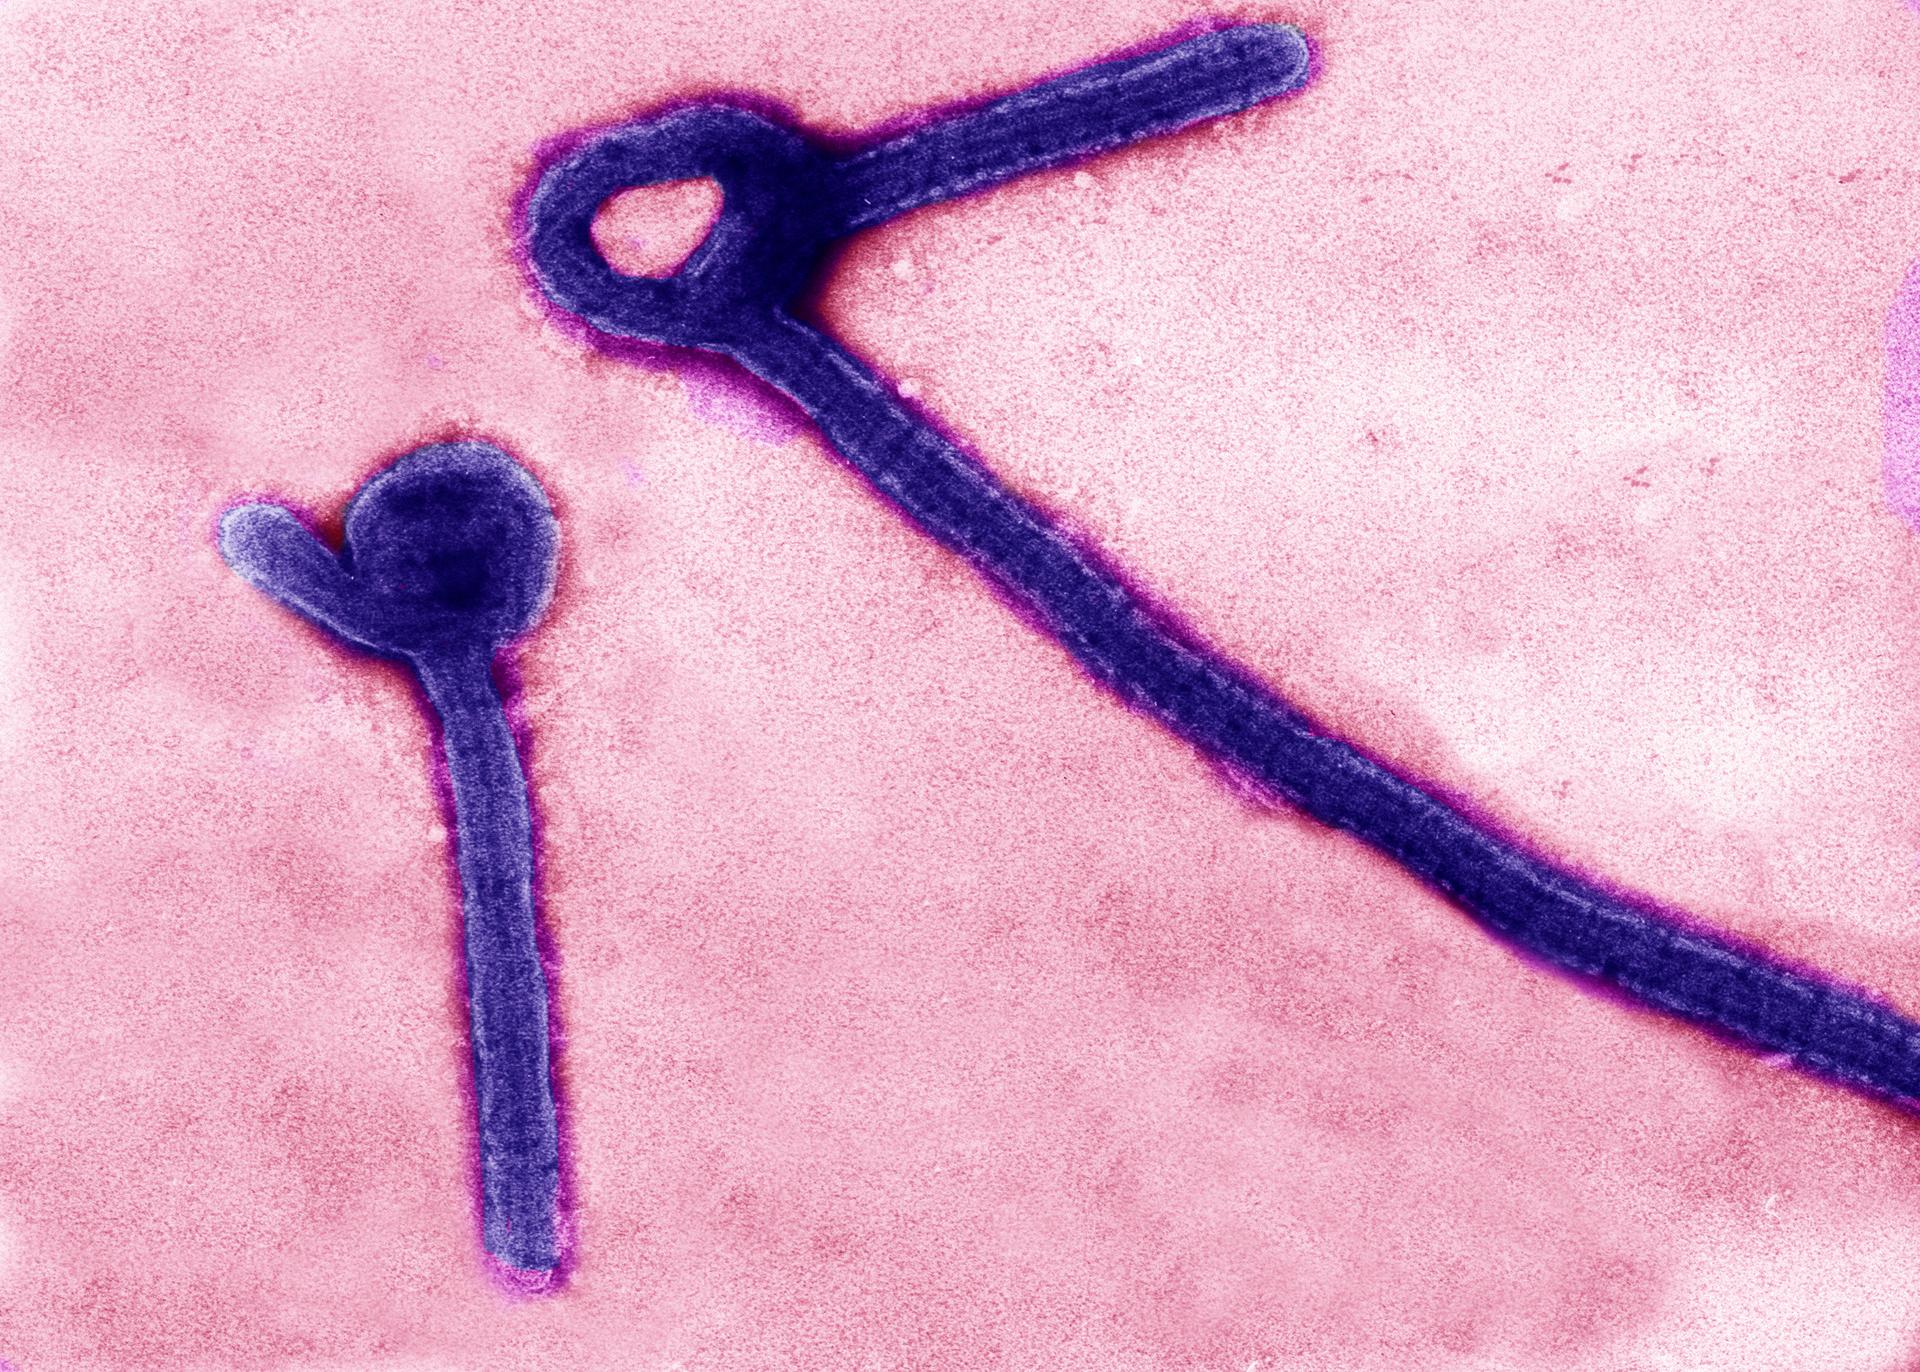  The Ebola virus might remain present in body fluids including semen longer than previously thought. 